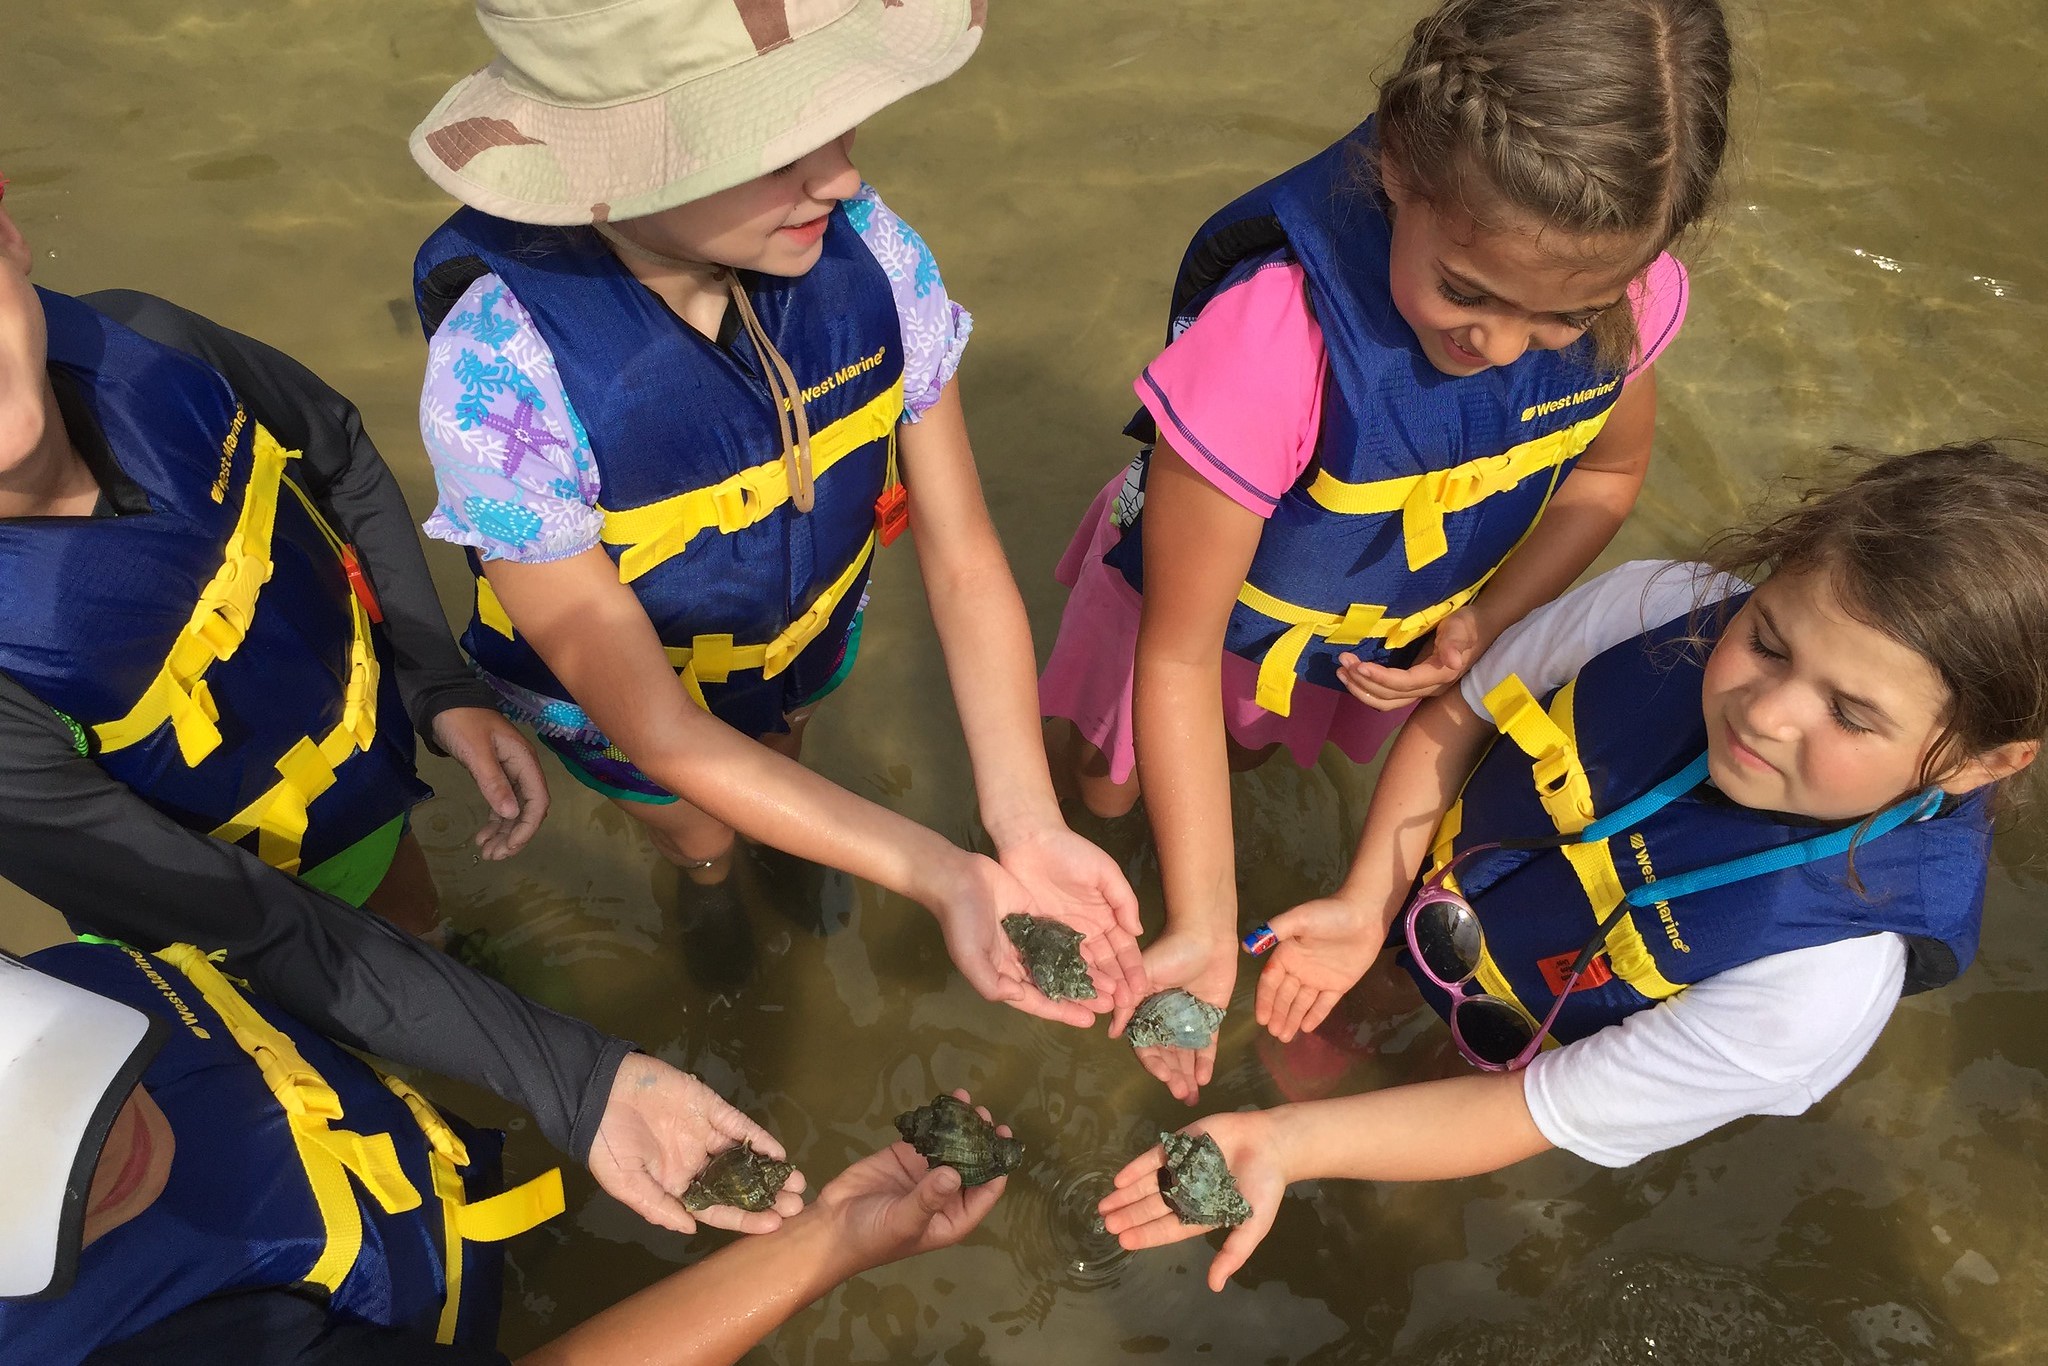 After some paddling, the youth stretched their legs on a nearby intertidal mudflat and found crown conchs galore! Crown conchs are a marine gastropod in the genus of sea snails. They have prominent spines on their whorl resembling a crown, giving the snail its common name.